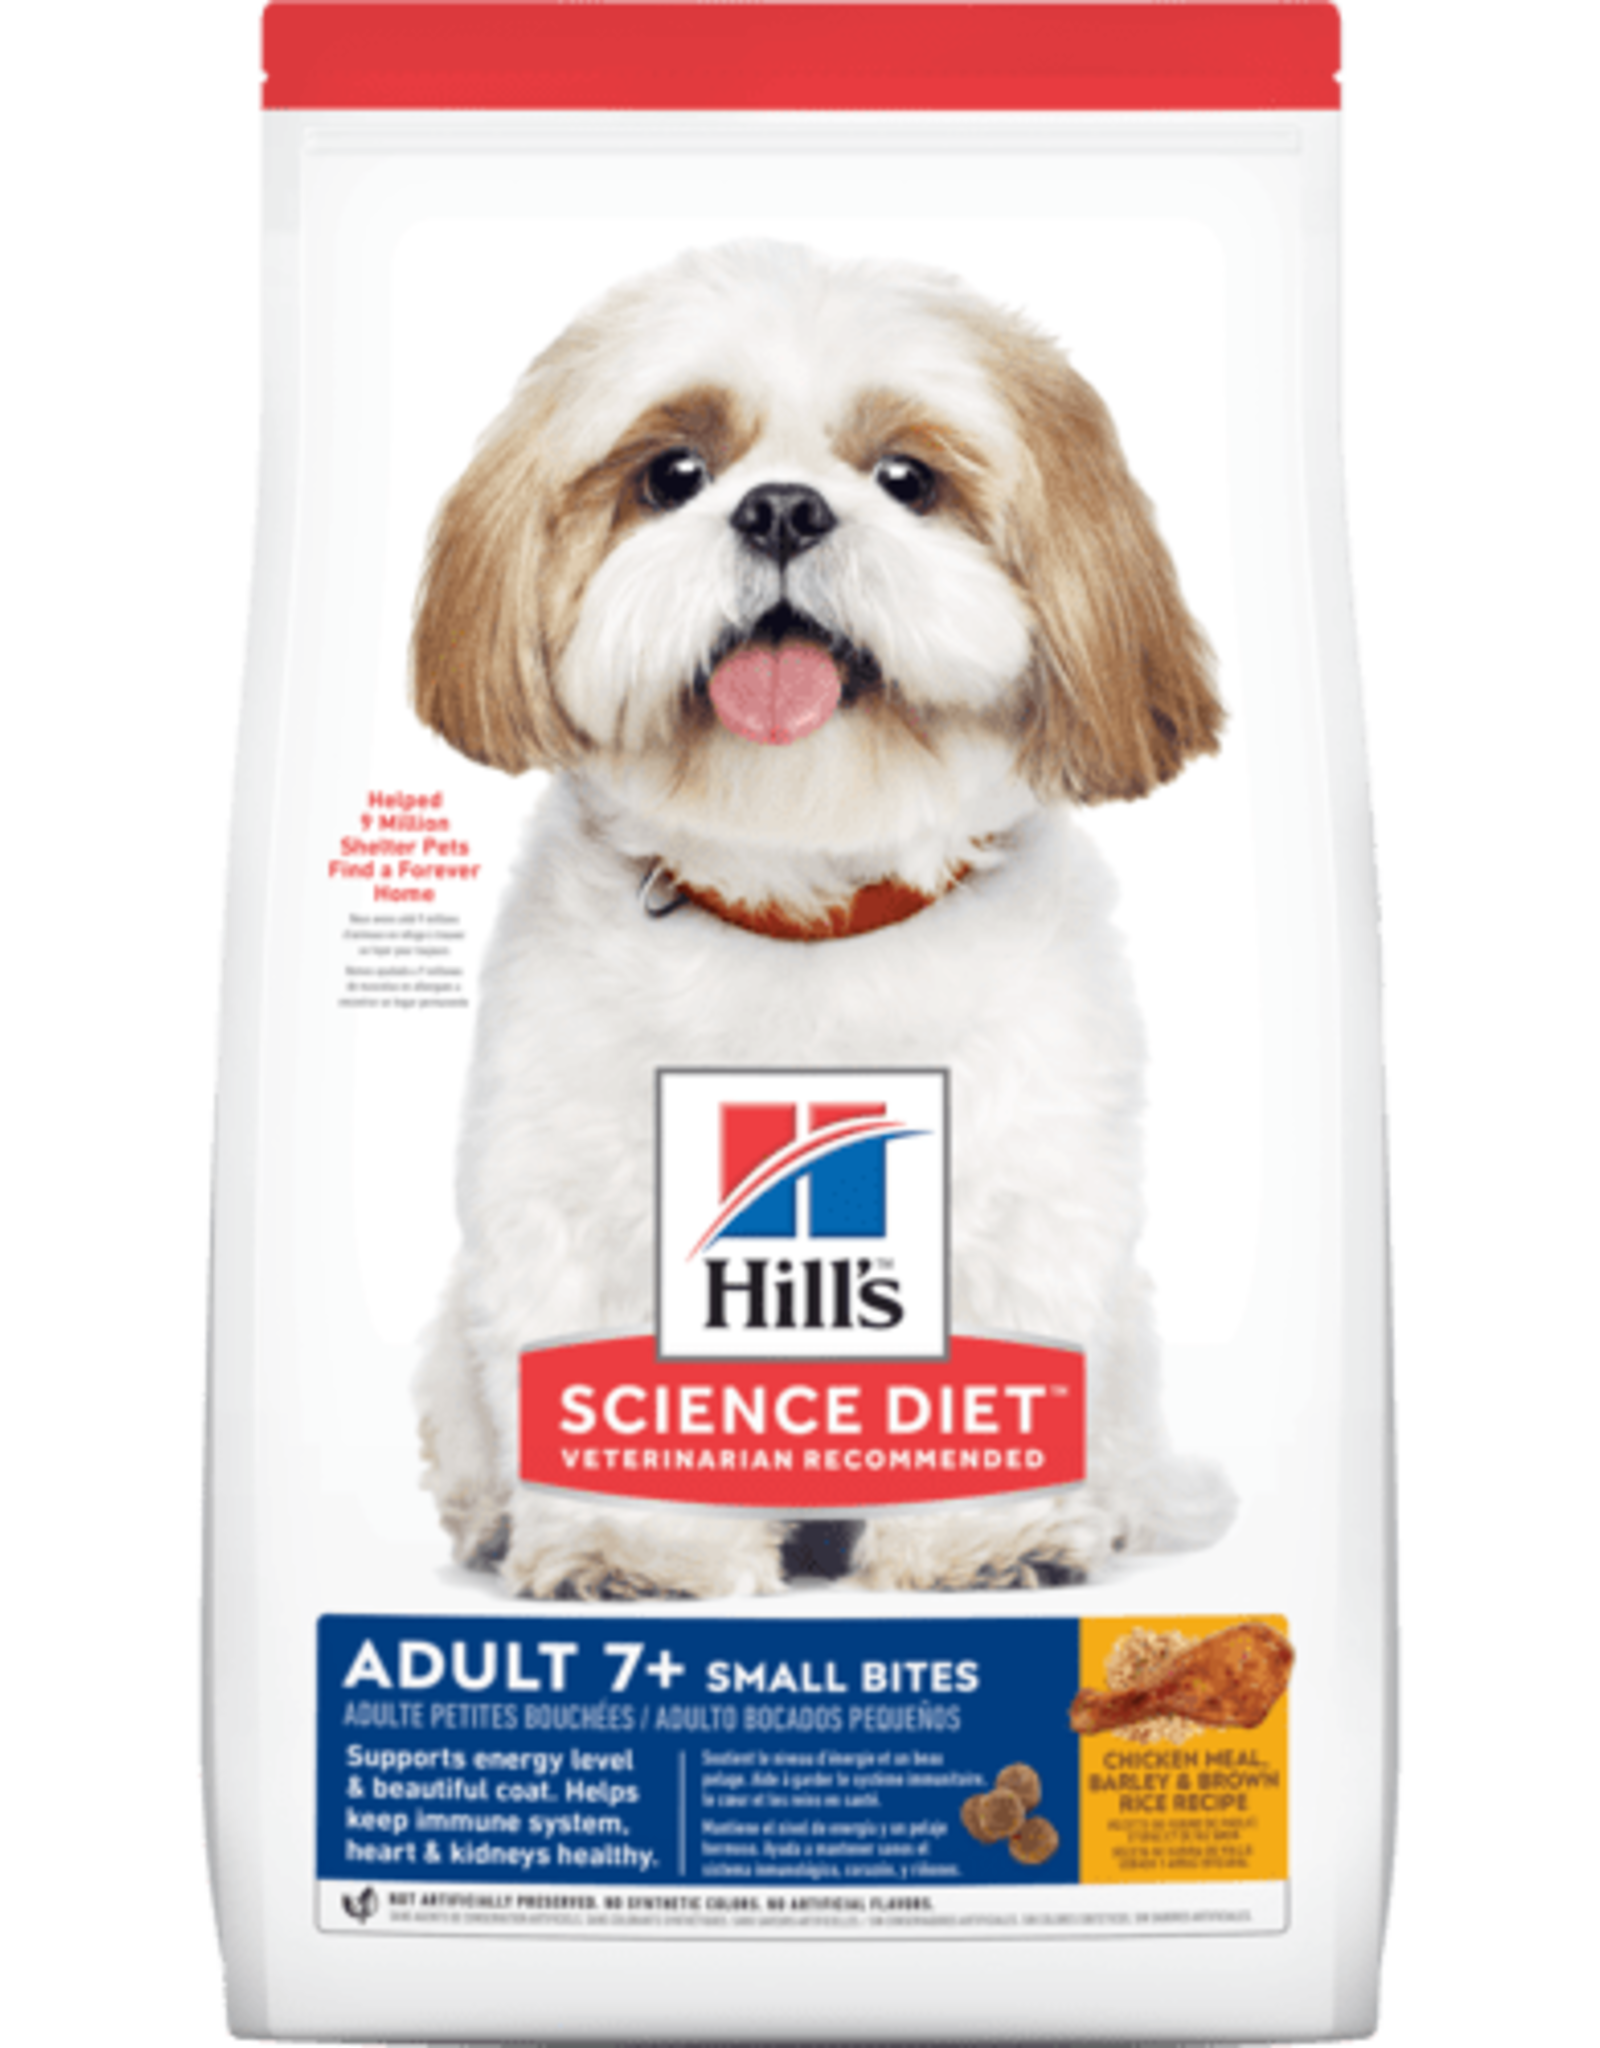 SCIENCE DIET HILL'S SCIENCE DIET CANINE MATURE SMALL BITES 3.5LBS